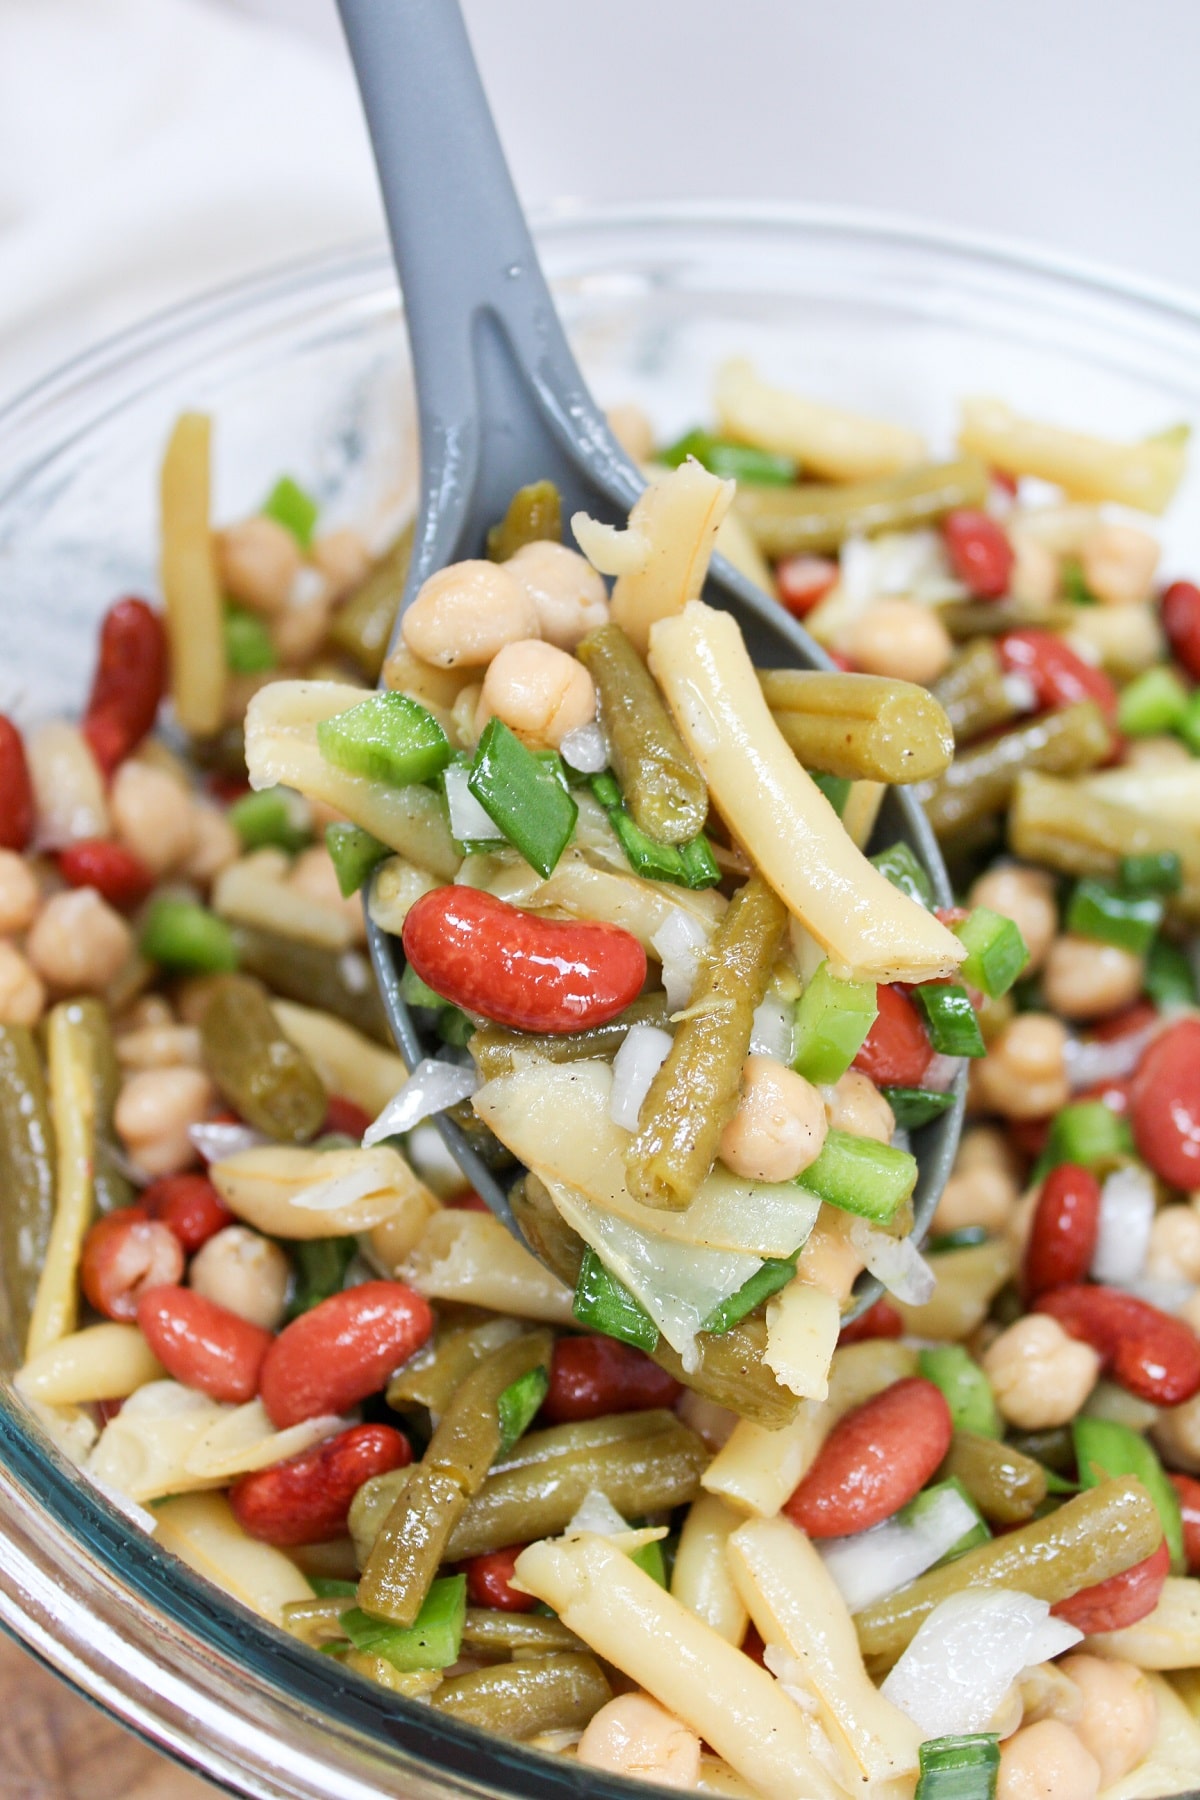 classic 3-bean salad scooped from the bowl on a spoon